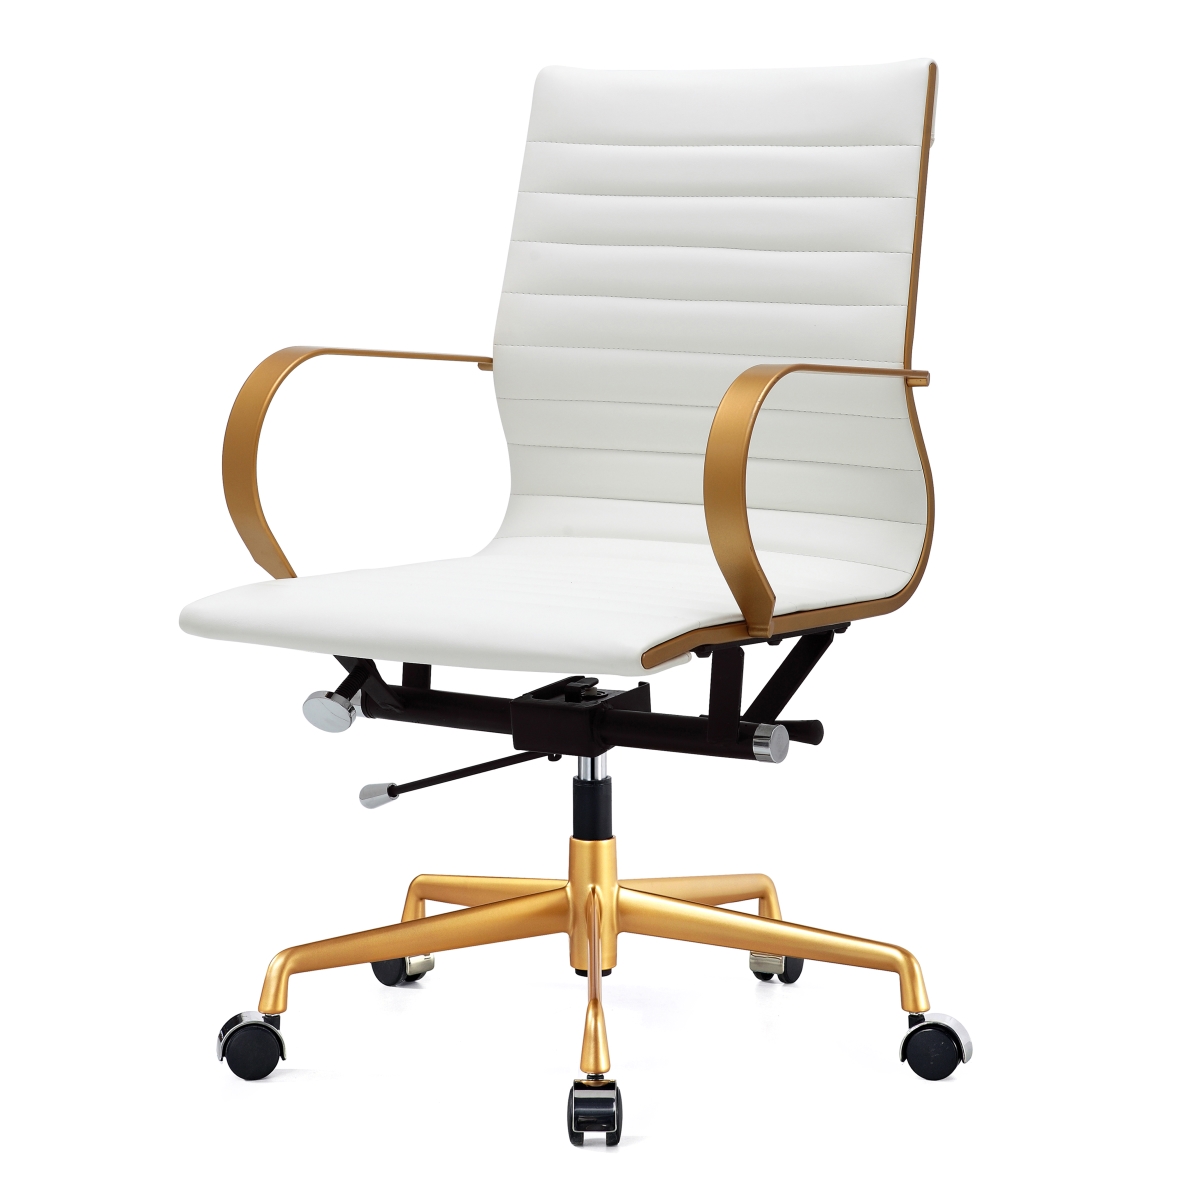 365-gd-whi M365 Office Chair In Vegan Leather - Gold & White